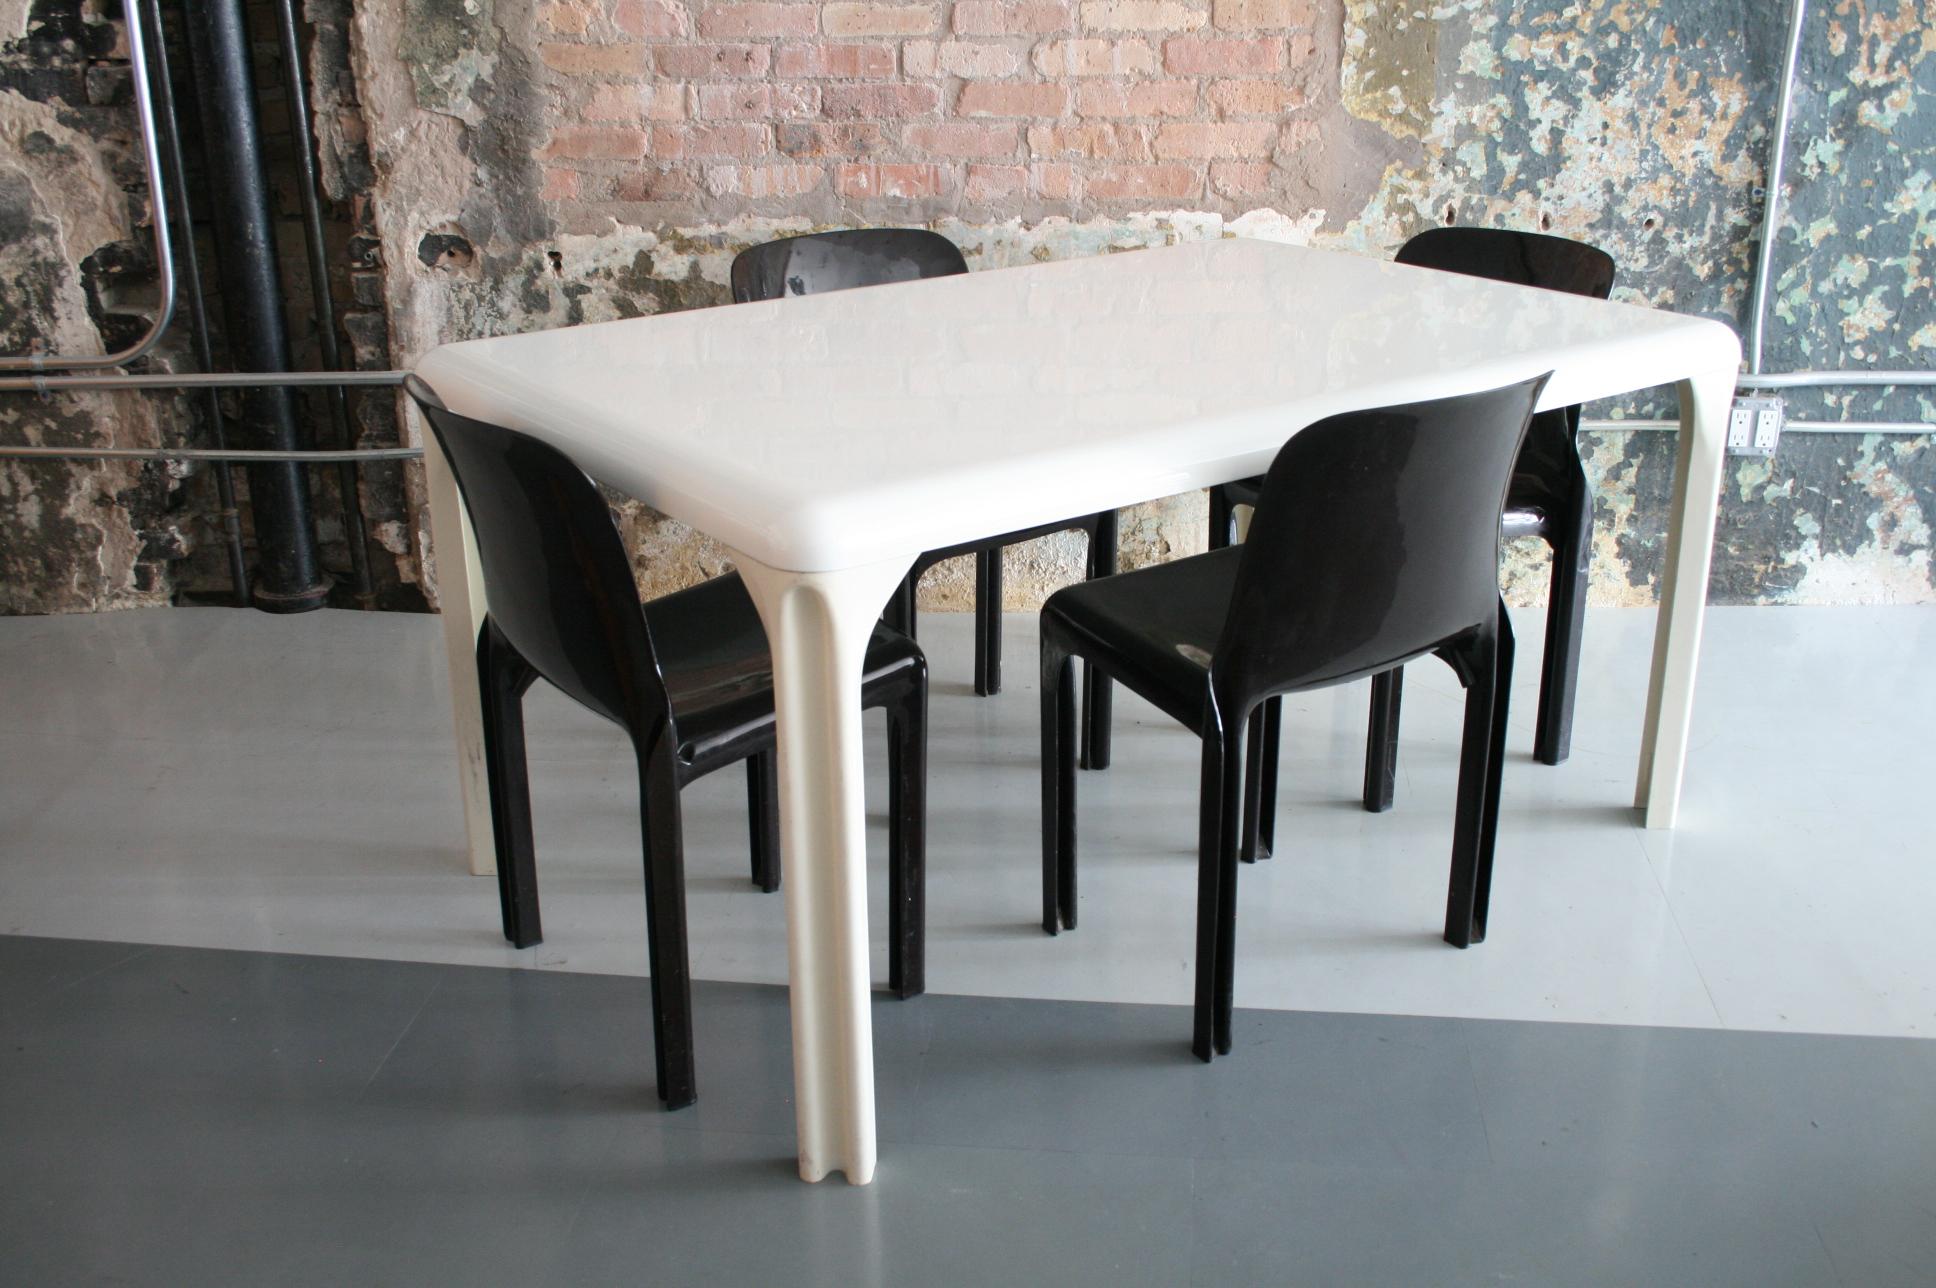 Magistretti table in white plastic. The table shows minor traces of wear like scratches from use. The tabletop and legs show some change of color over the years. The legs can be removed (which is practical for storage and shipping). Included is a